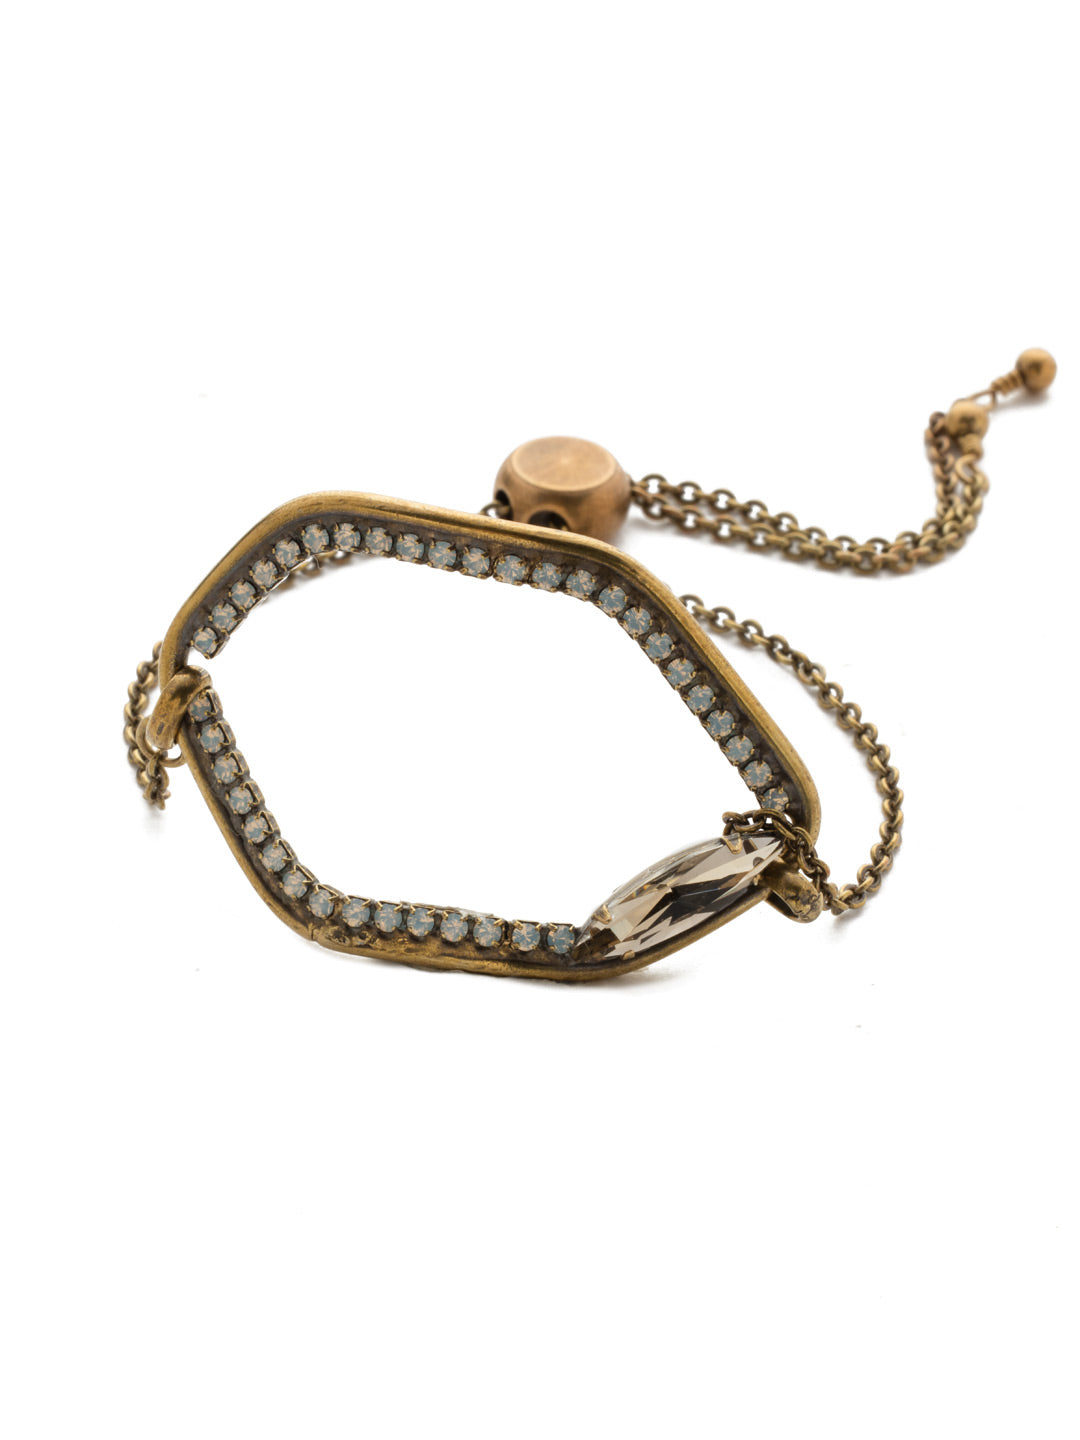 Demetria Slider Bracelet - BEH28AGROB - <p>Don't be shy. Slide on this classic bracelet stunner and make a statement. Its unique shape completely lined in crystals and accented with a navette stone demands to be noticed. Slider bracelet closure. From Sorrelli's Rocky Beach collection in our Antique Gold-tone finish.</p>